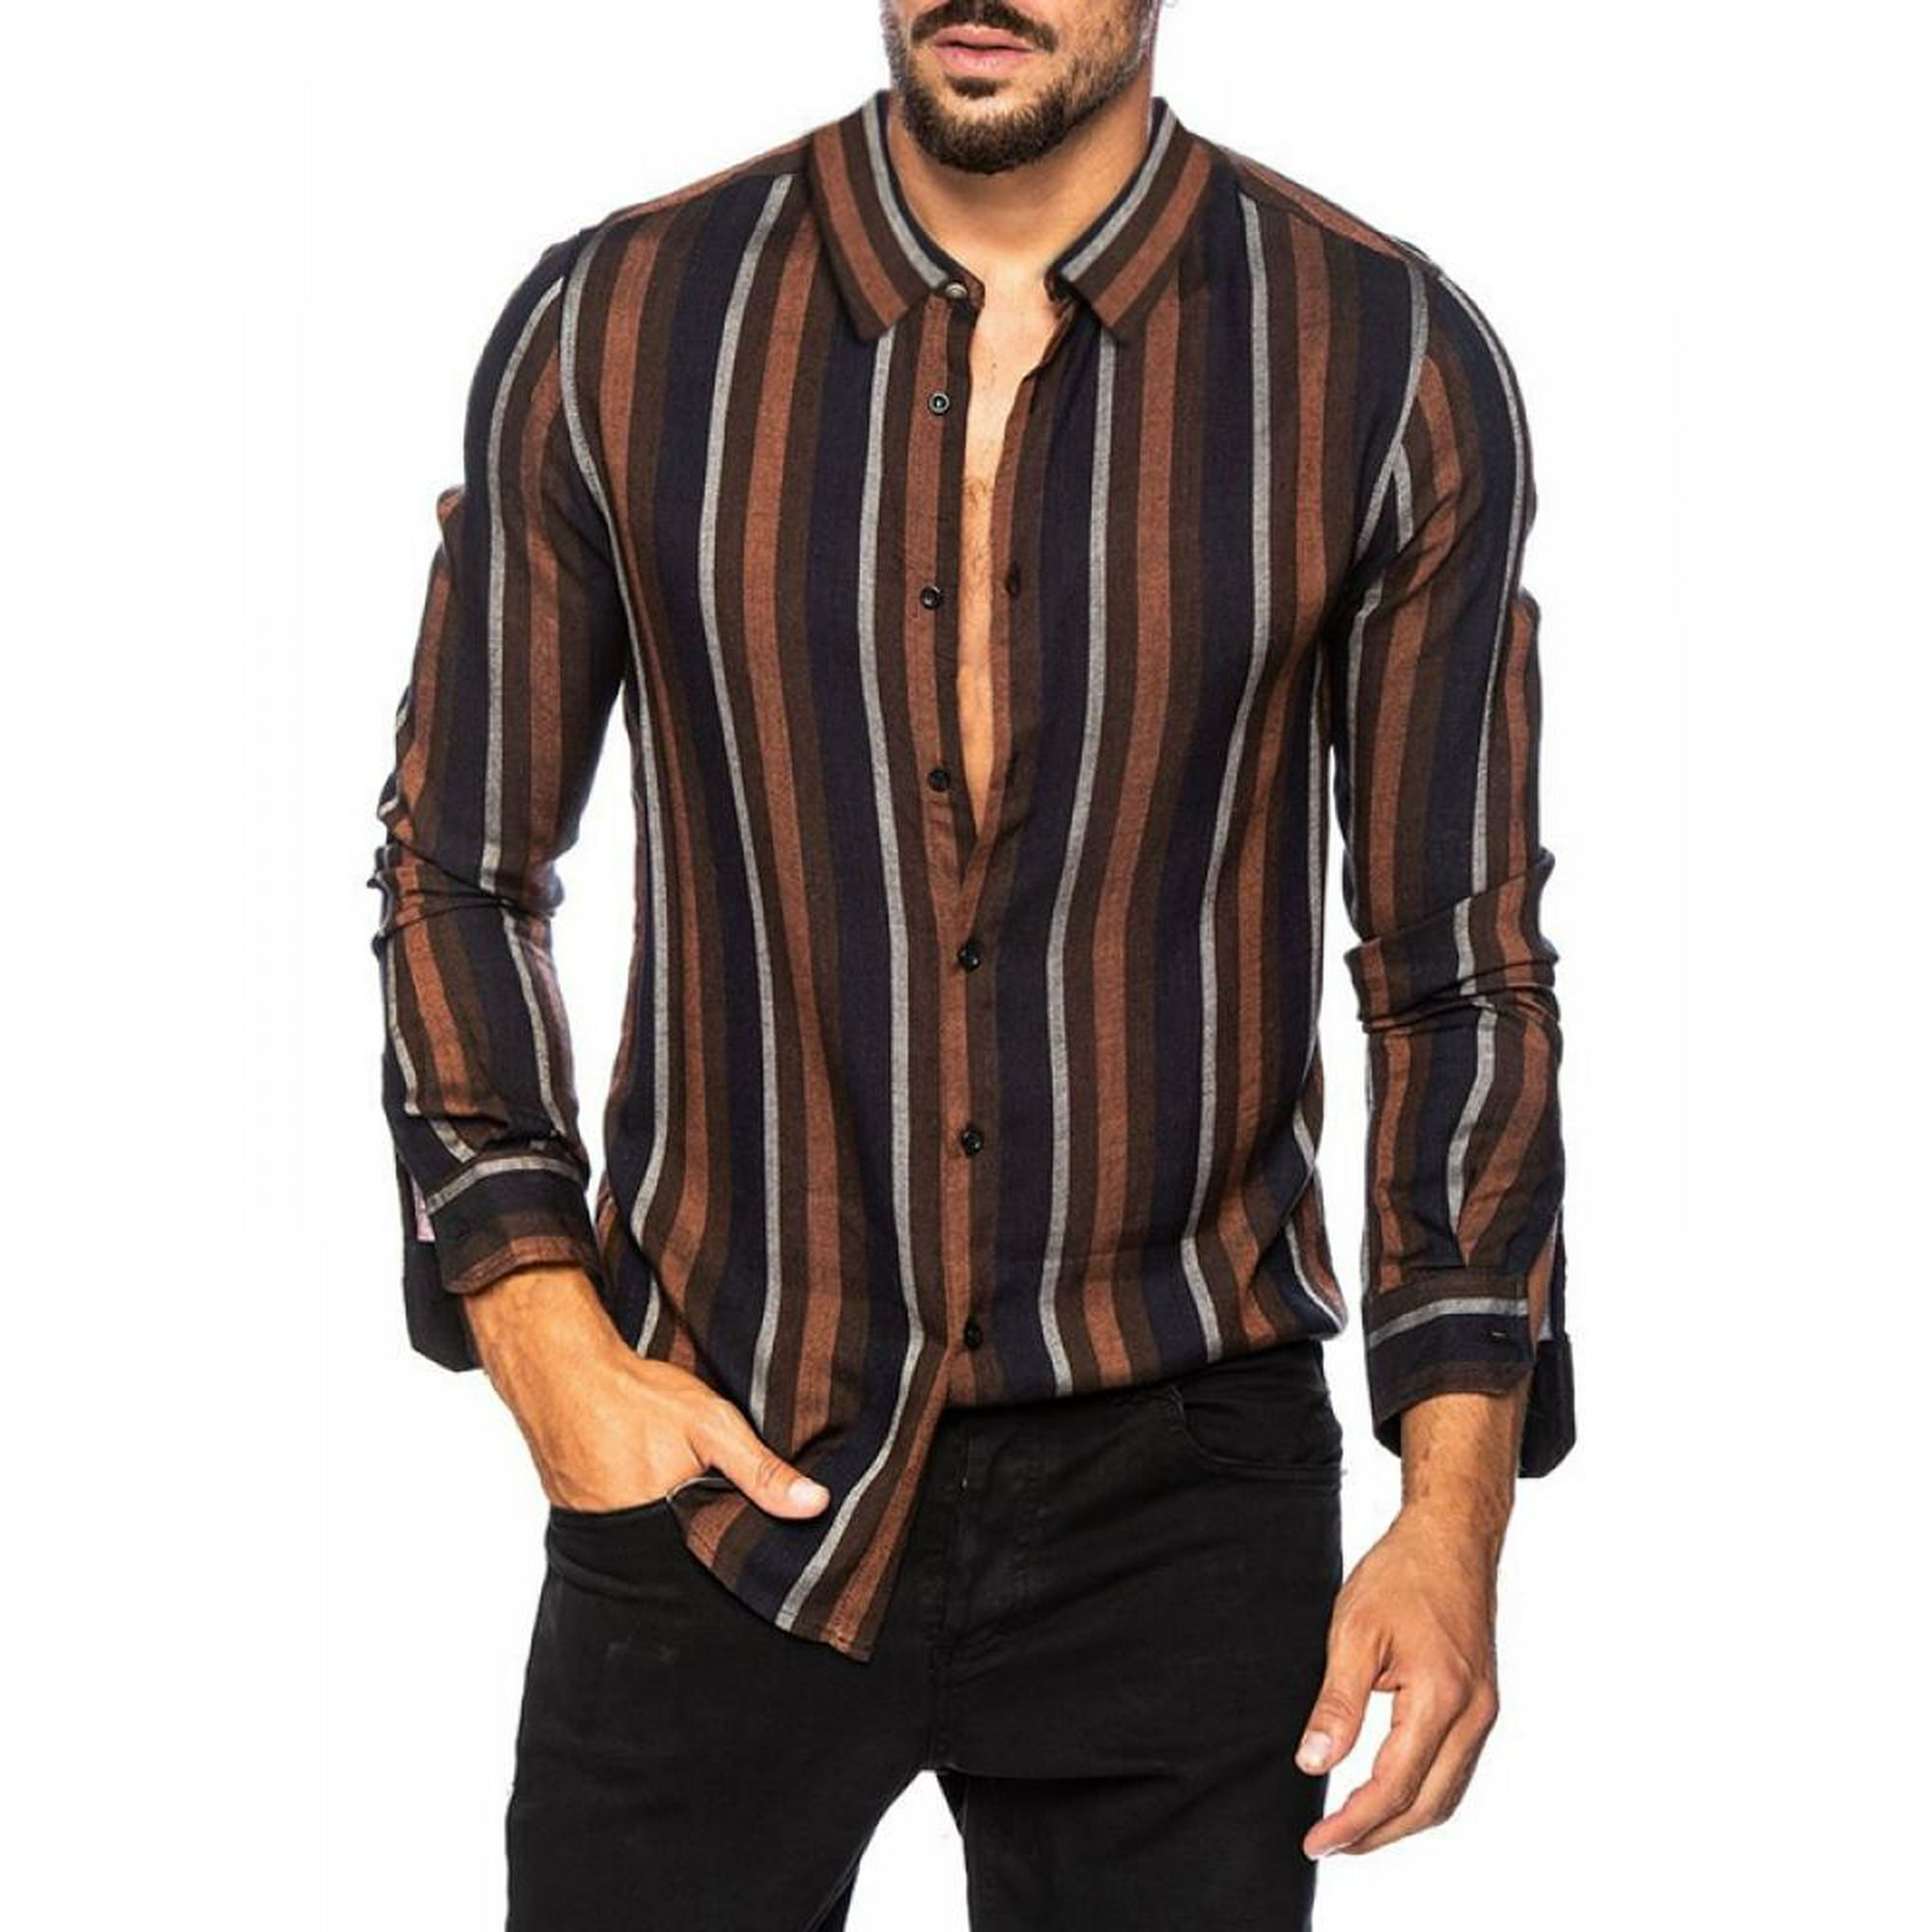 Men's Work & Business Casual Shirts